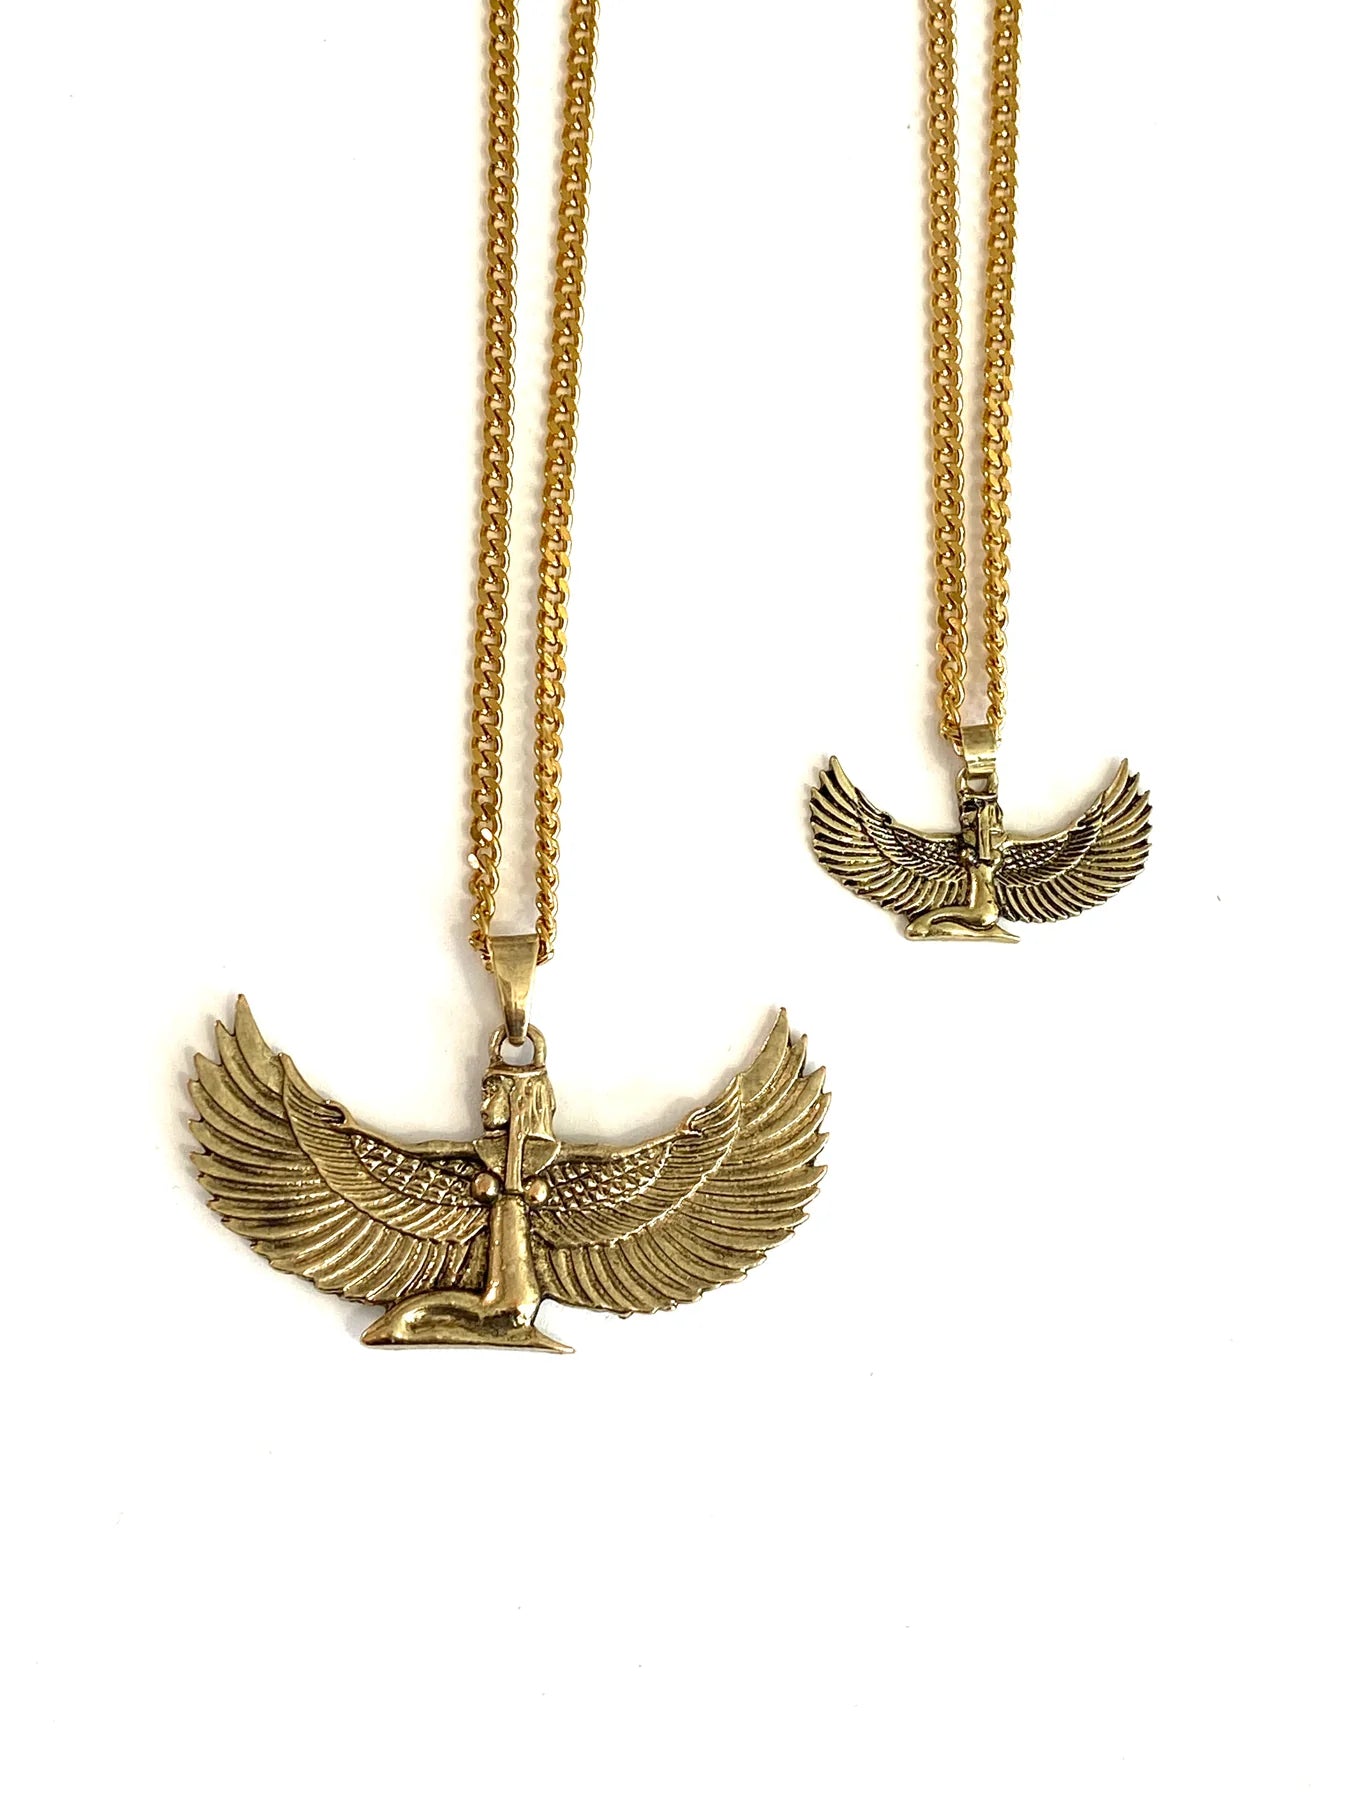 Seated Goddess Isis Charm Necklace